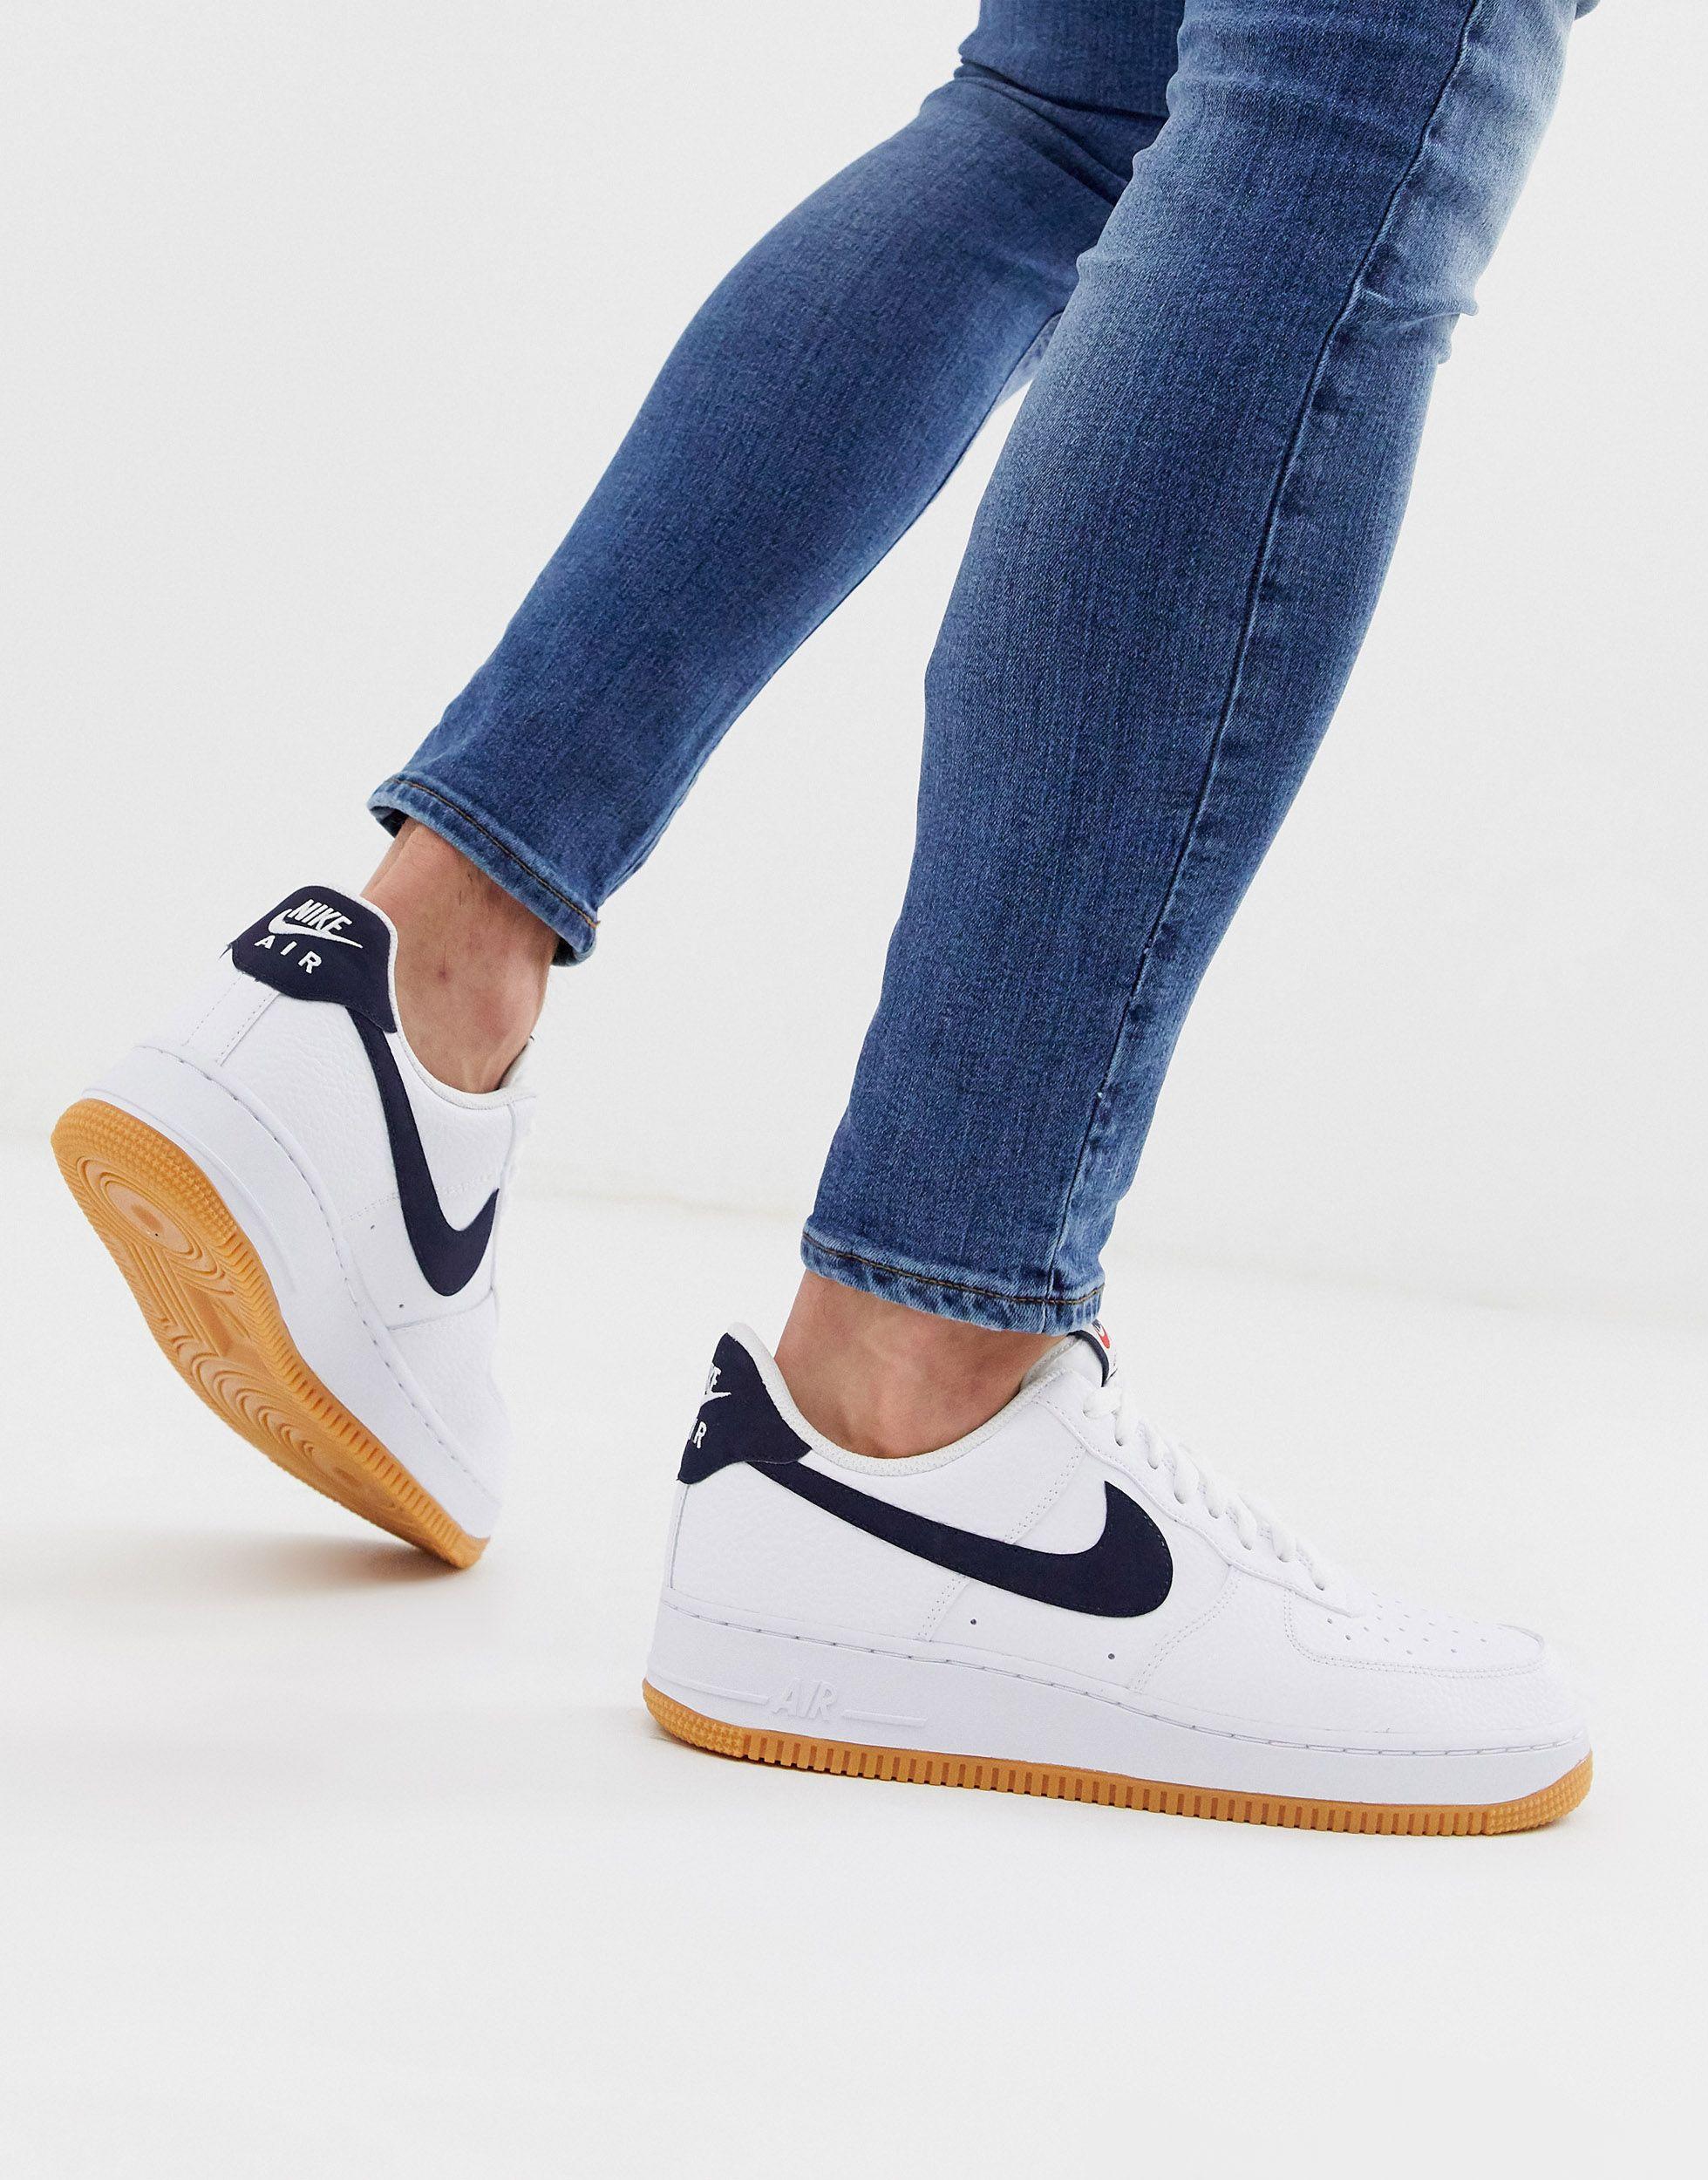 Sneakers With Navy Swoosh And Gum Sole 